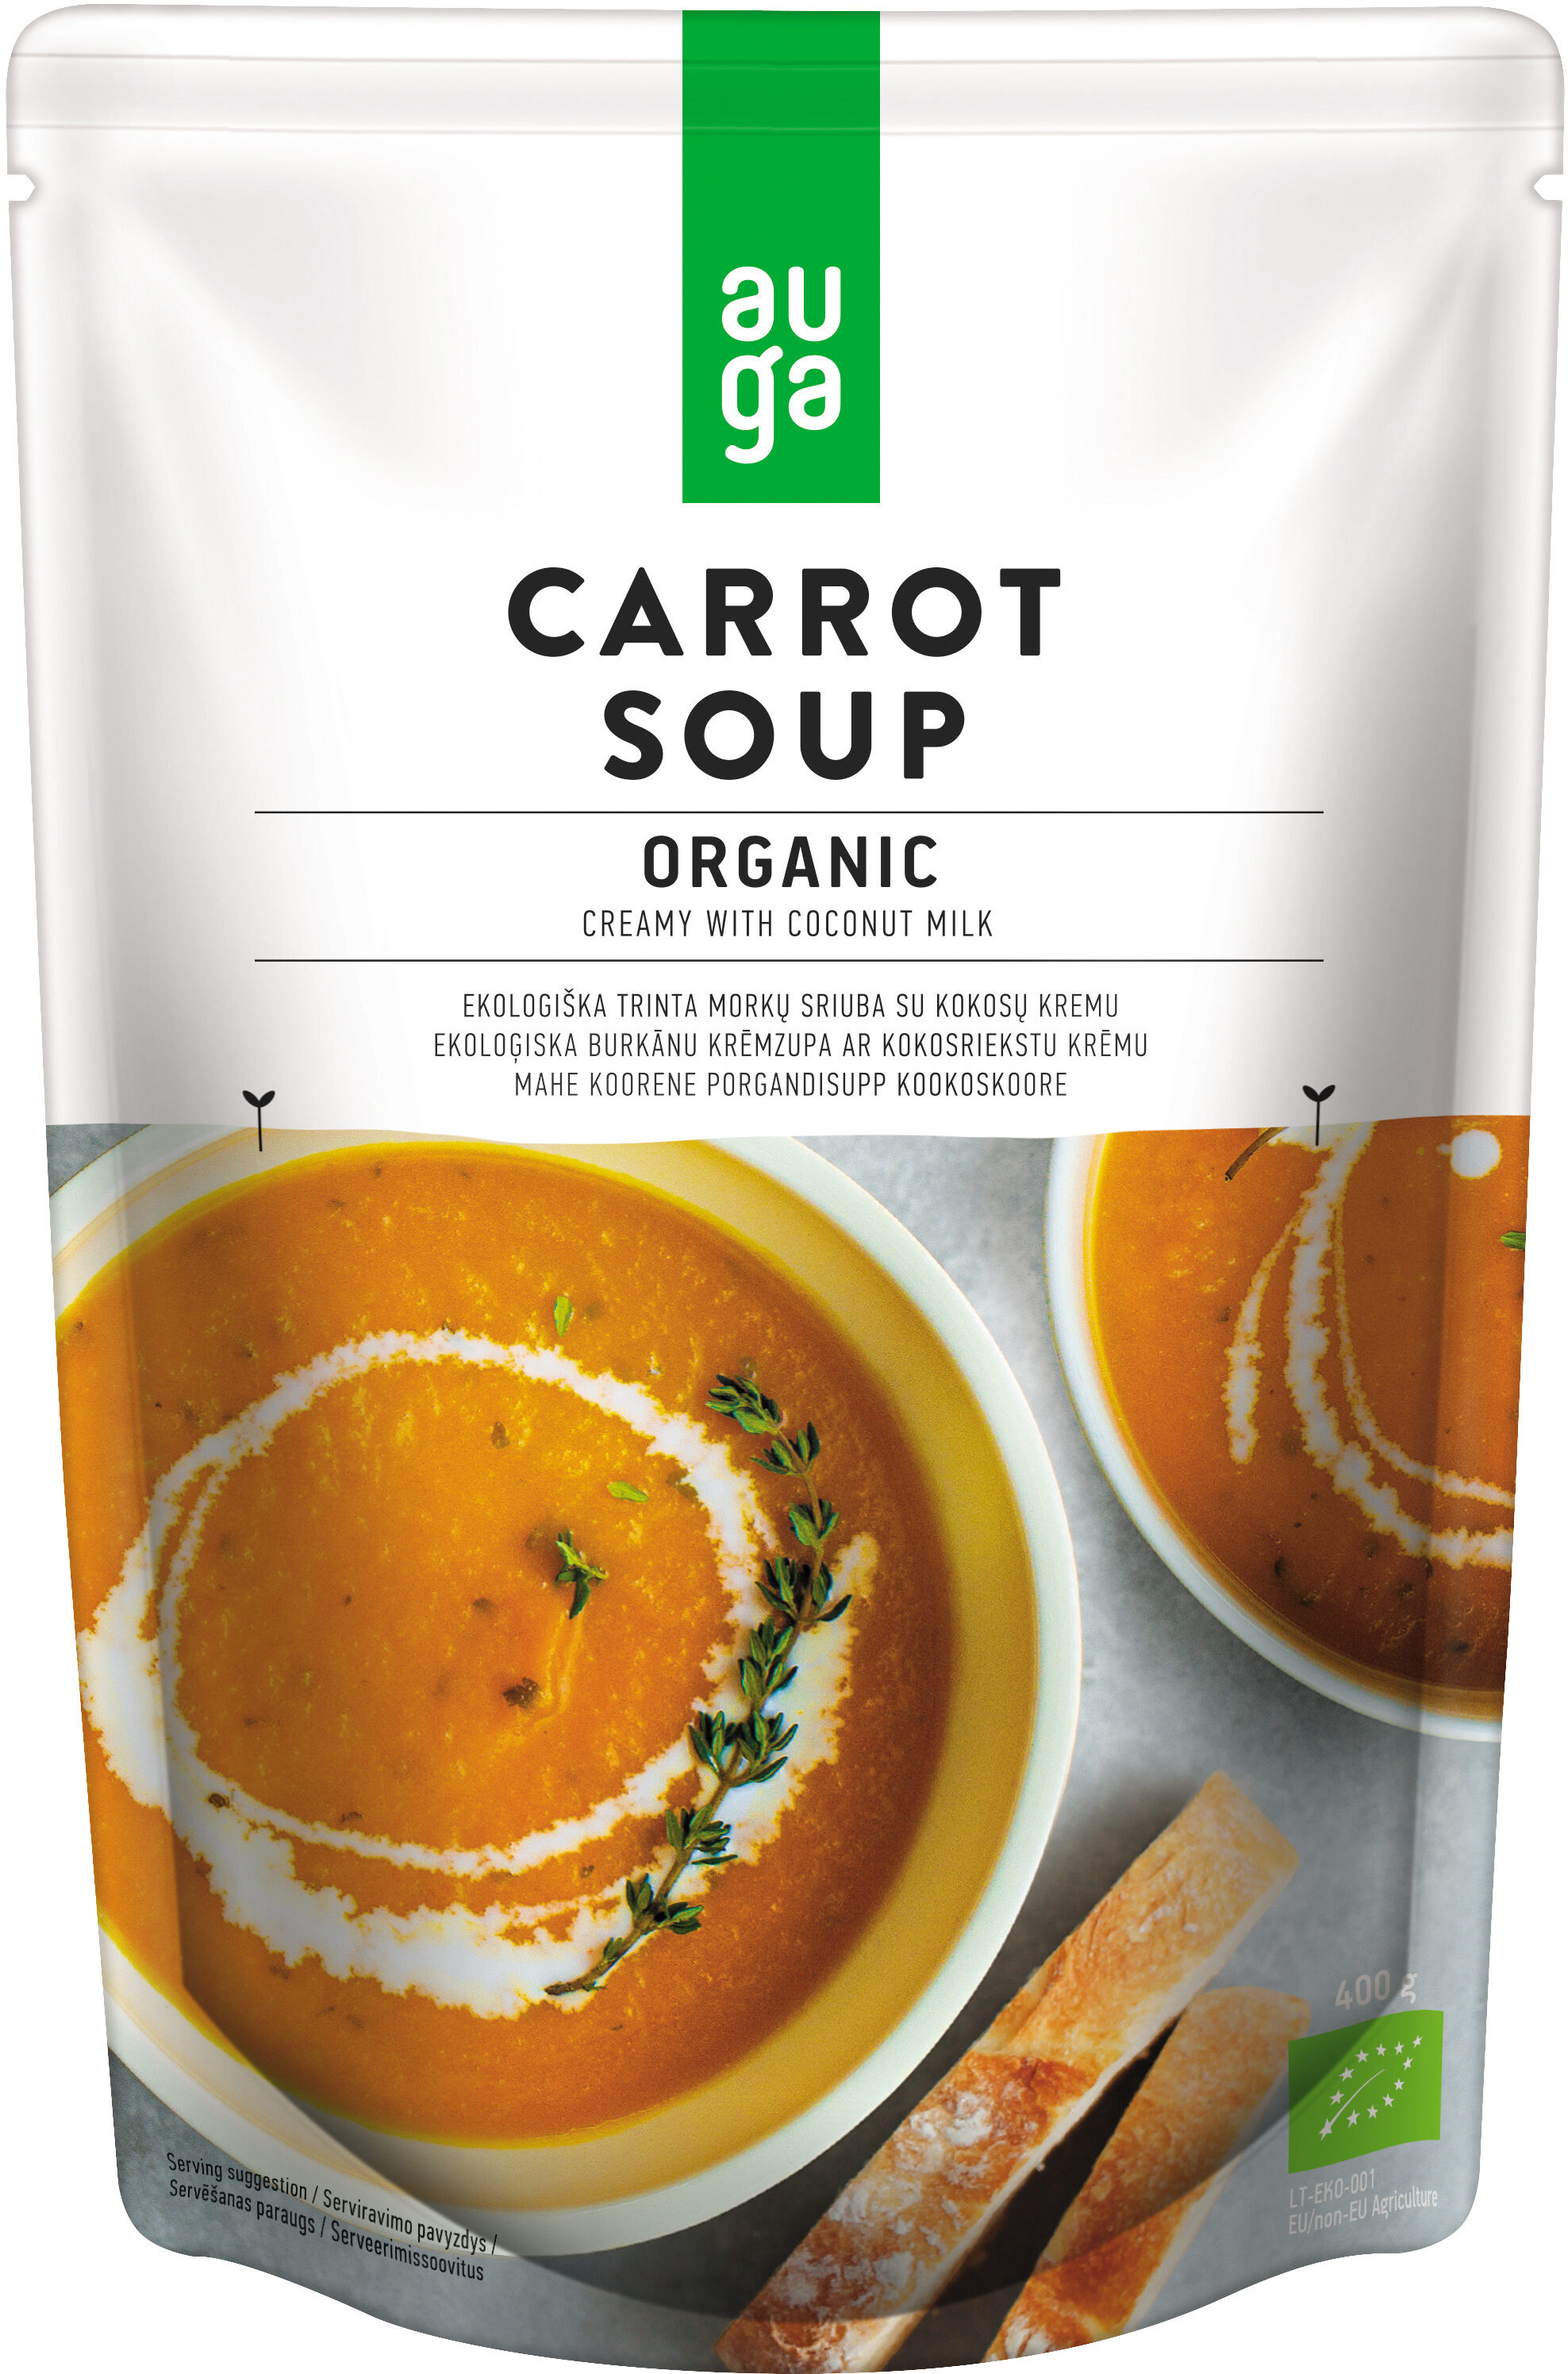 Carrot Soup - Product